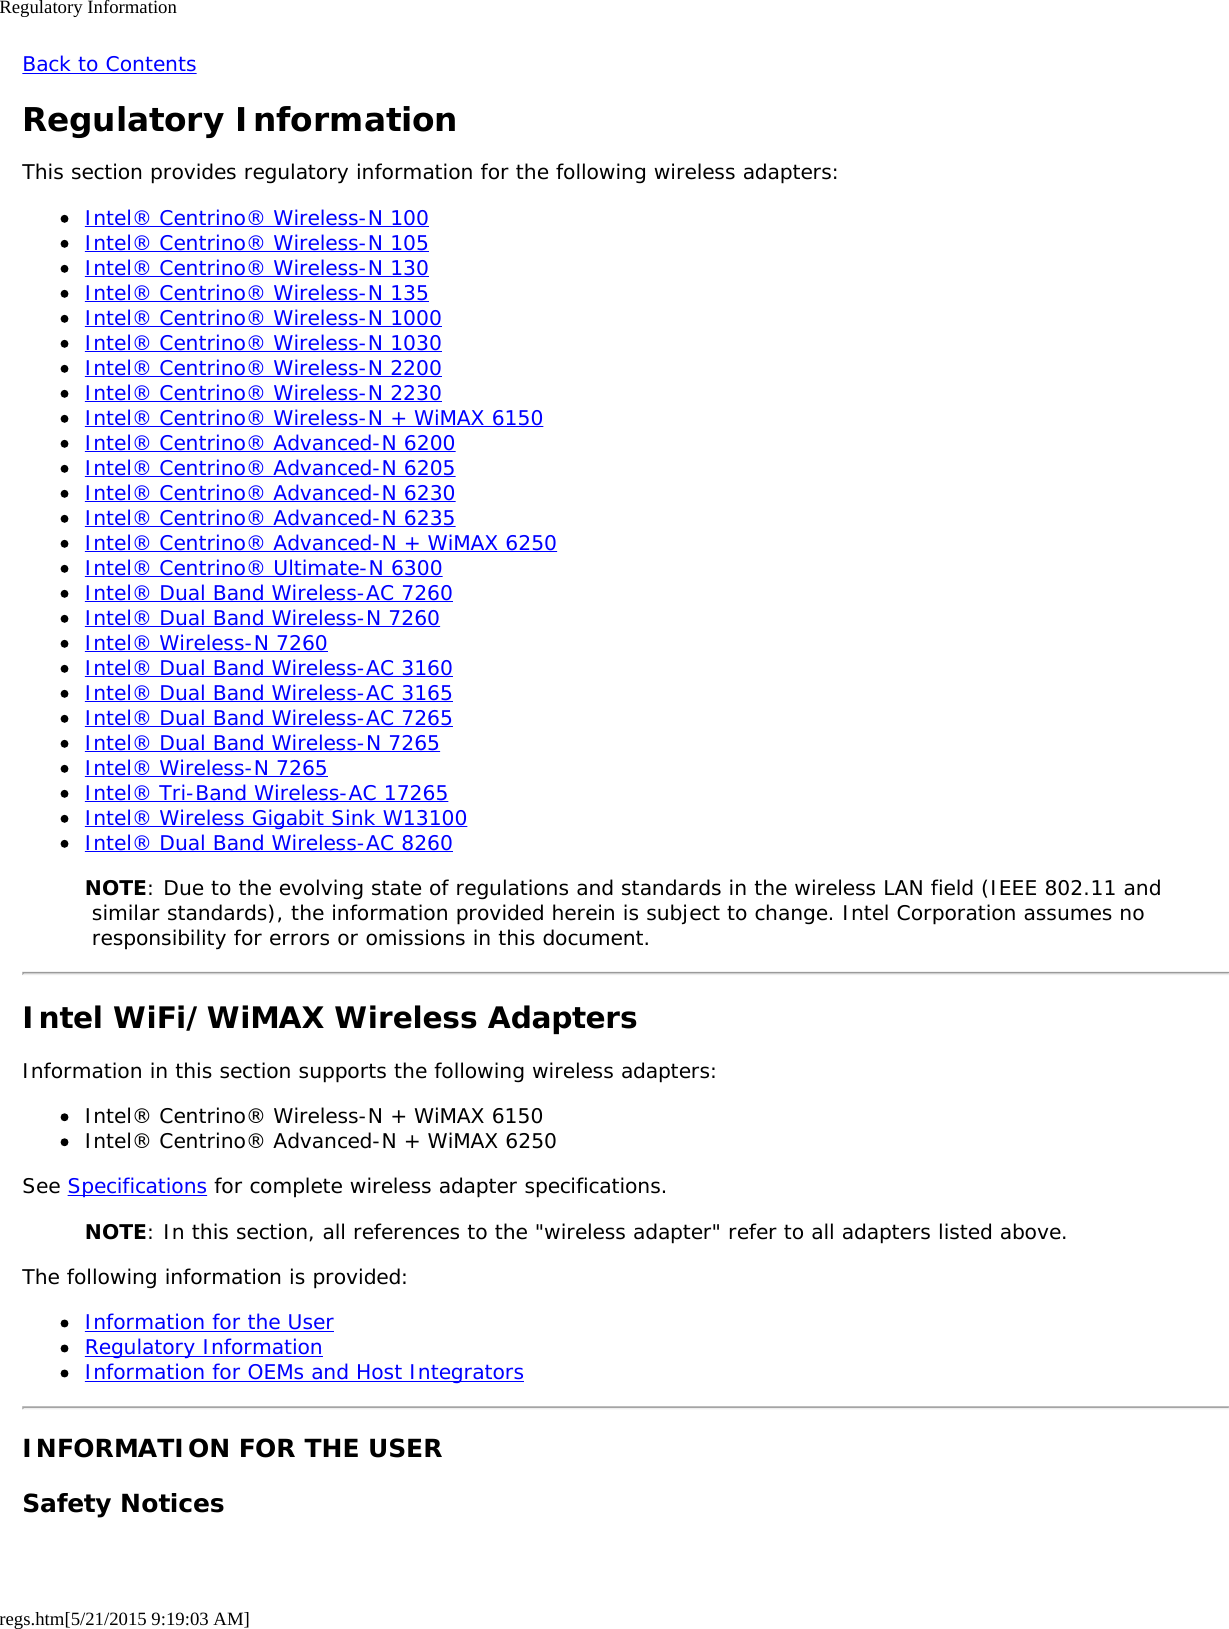 Regulatory Informationregs.htm[5/21/2015 9:19:03 AM]Back to ContentsRegulatory InformationThis section provides regulatory information for the following wireless adapters:Intel® Centrino® Wireless-N 100Intel® Centrino® Wireless-N 105Intel® Centrino® Wireless-N 130Intel® Centrino® Wireless-N 135Intel® Centrino® Wireless-N 1000Intel® Centrino® Wireless-N 1030Intel® Centrino® Wireless-N 2200Intel® Centrino® Wireless-N 2230Intel® Centrino® Wireless-N + WiMAX 6150Intel® Centrino® Advanced-N 6200Intel® Centrino® Advanced-N 6205Intel® Centrino® Advanced-N 6230Intel® Centrino® Advanced-N 6235Intel® Centrino® Advanced-N + WiMAX 6250Intel® Centrino® Ultimate-N 6300Intel® Dual Band Wireless-AC 7260Intel® Dual Band Wireless-N 7260Intel® Wireless-N 7260Intel® Dual Band Wireless-AC 3160Intel® Dual Band Wireless-AC 3165Intel® Dual Band Wireless-AC 7265Intel® Dual Band Wireless-N 7265Intel® Wireless-N 7265Intel® Tri-Band Wireless-AC 17265Intel® Wireless Gigabit Sink W13100Intel® Dual Band Wireless-AC 8260NOTE: Due to the evolving state of regulations and standards in the wireless LAN field (IEEE 802.11 and similar standards), the information provided herein is subject to change. Intel Corporation assumes no responsibility for errors or omissions in this document.Intel WiFi/WiMAX Wireless AdaptersInformation in this section supports the following wireless adapters:Intel® Centrino® Wireless-N + WiMAX 6150Intel® Centrino® Advanced-N + WiMAX 6250See Specifications for complete wireless adapter specifications.NOTE: In this section, all references to the &quot;wireless adapter&quot; refer to all adapters listed above.The following information is provided:Information for the UserRegulatory InformationInformation for OEMs and Host IntegratorsINFORMATION FOR THE USERSafety Notices